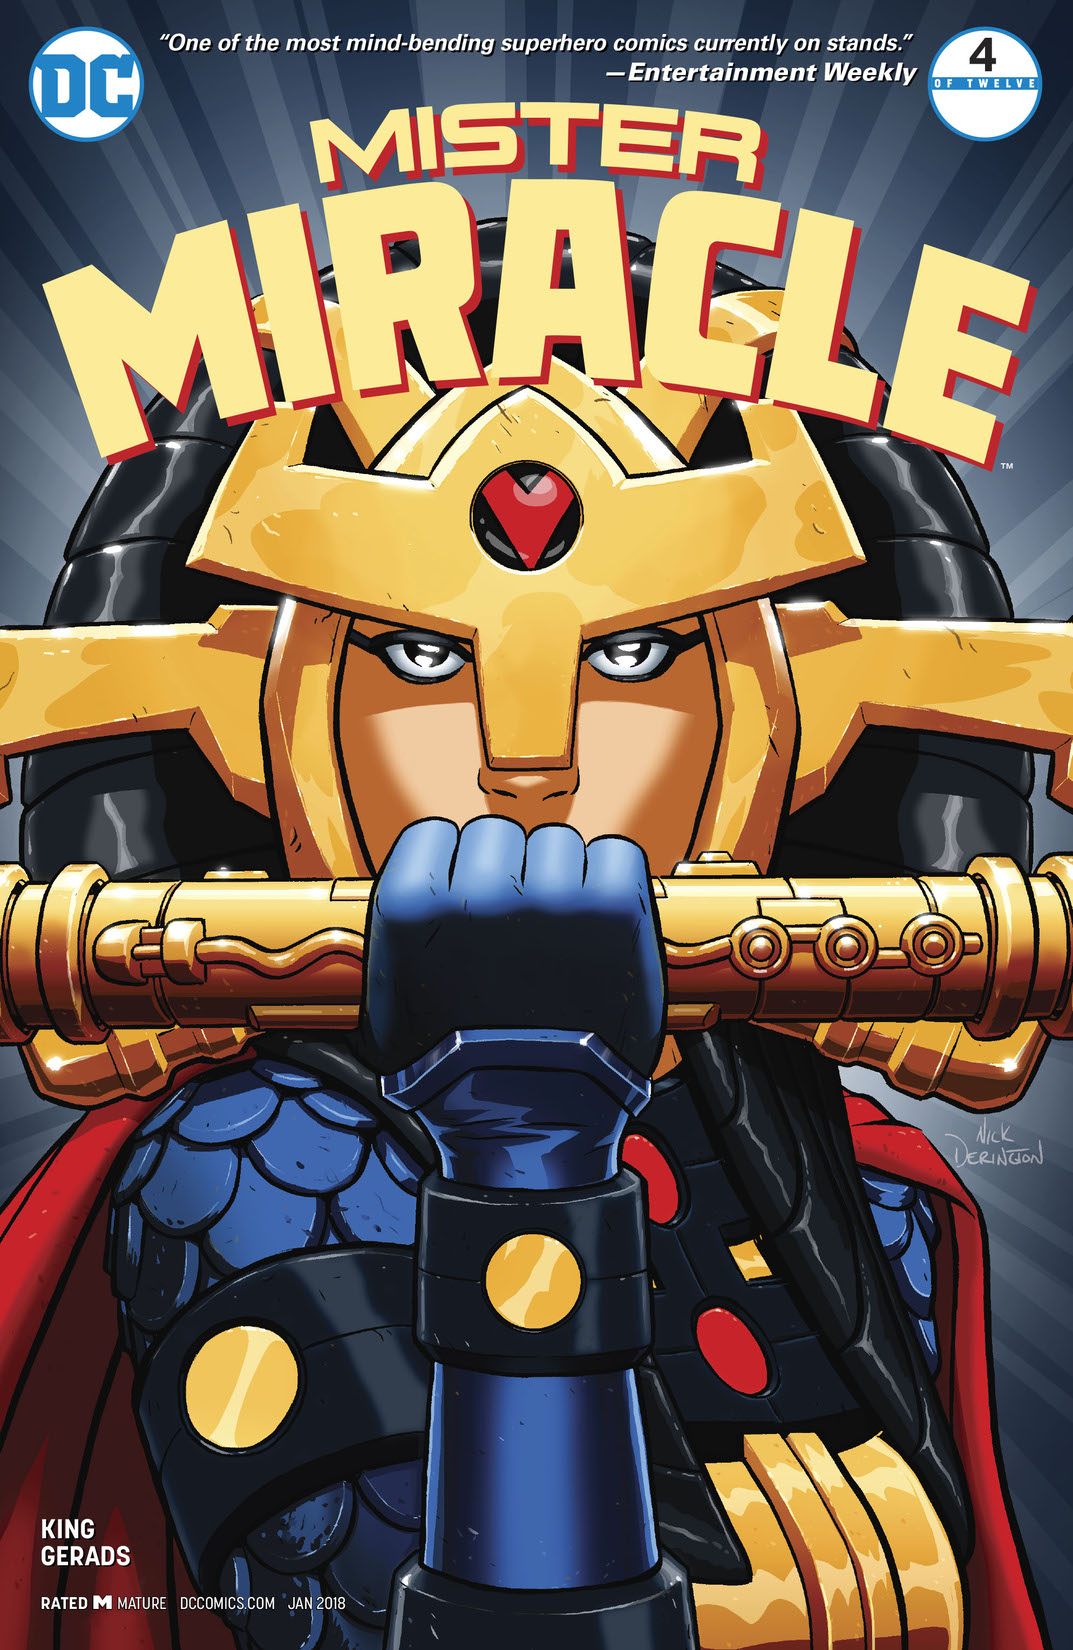 Mister Miracle (2017-) #4 preview images